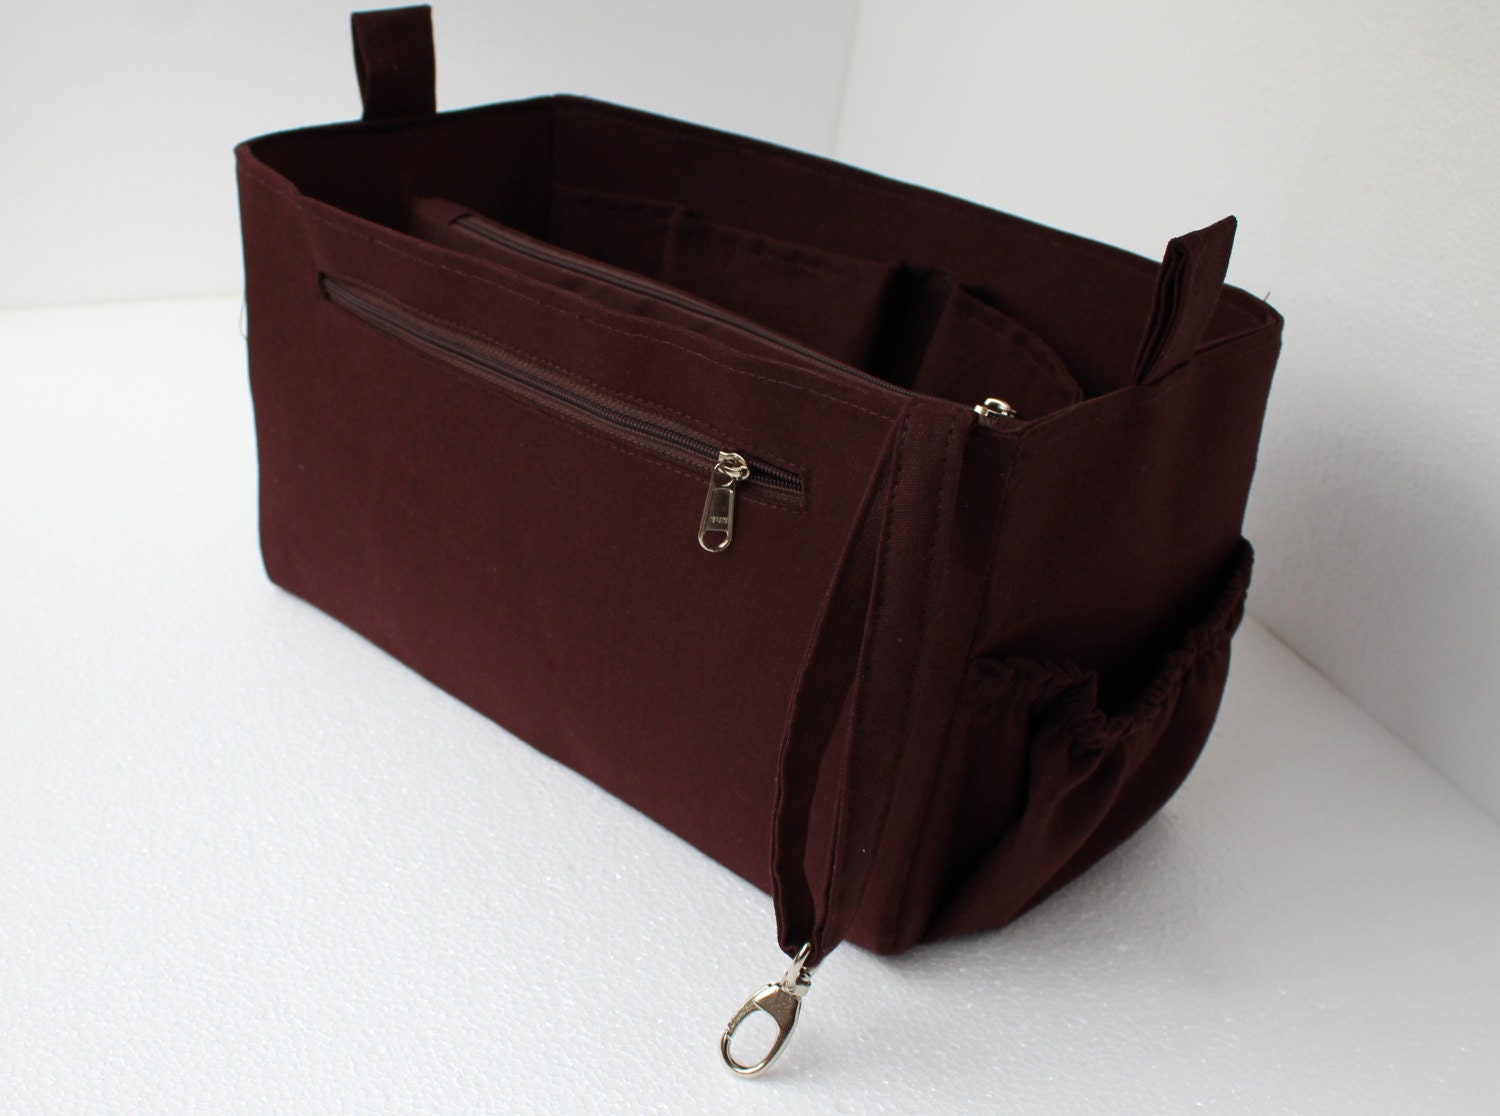 Extra Large Purse Organizer Bag Organizer Insert in Rich Red Fits